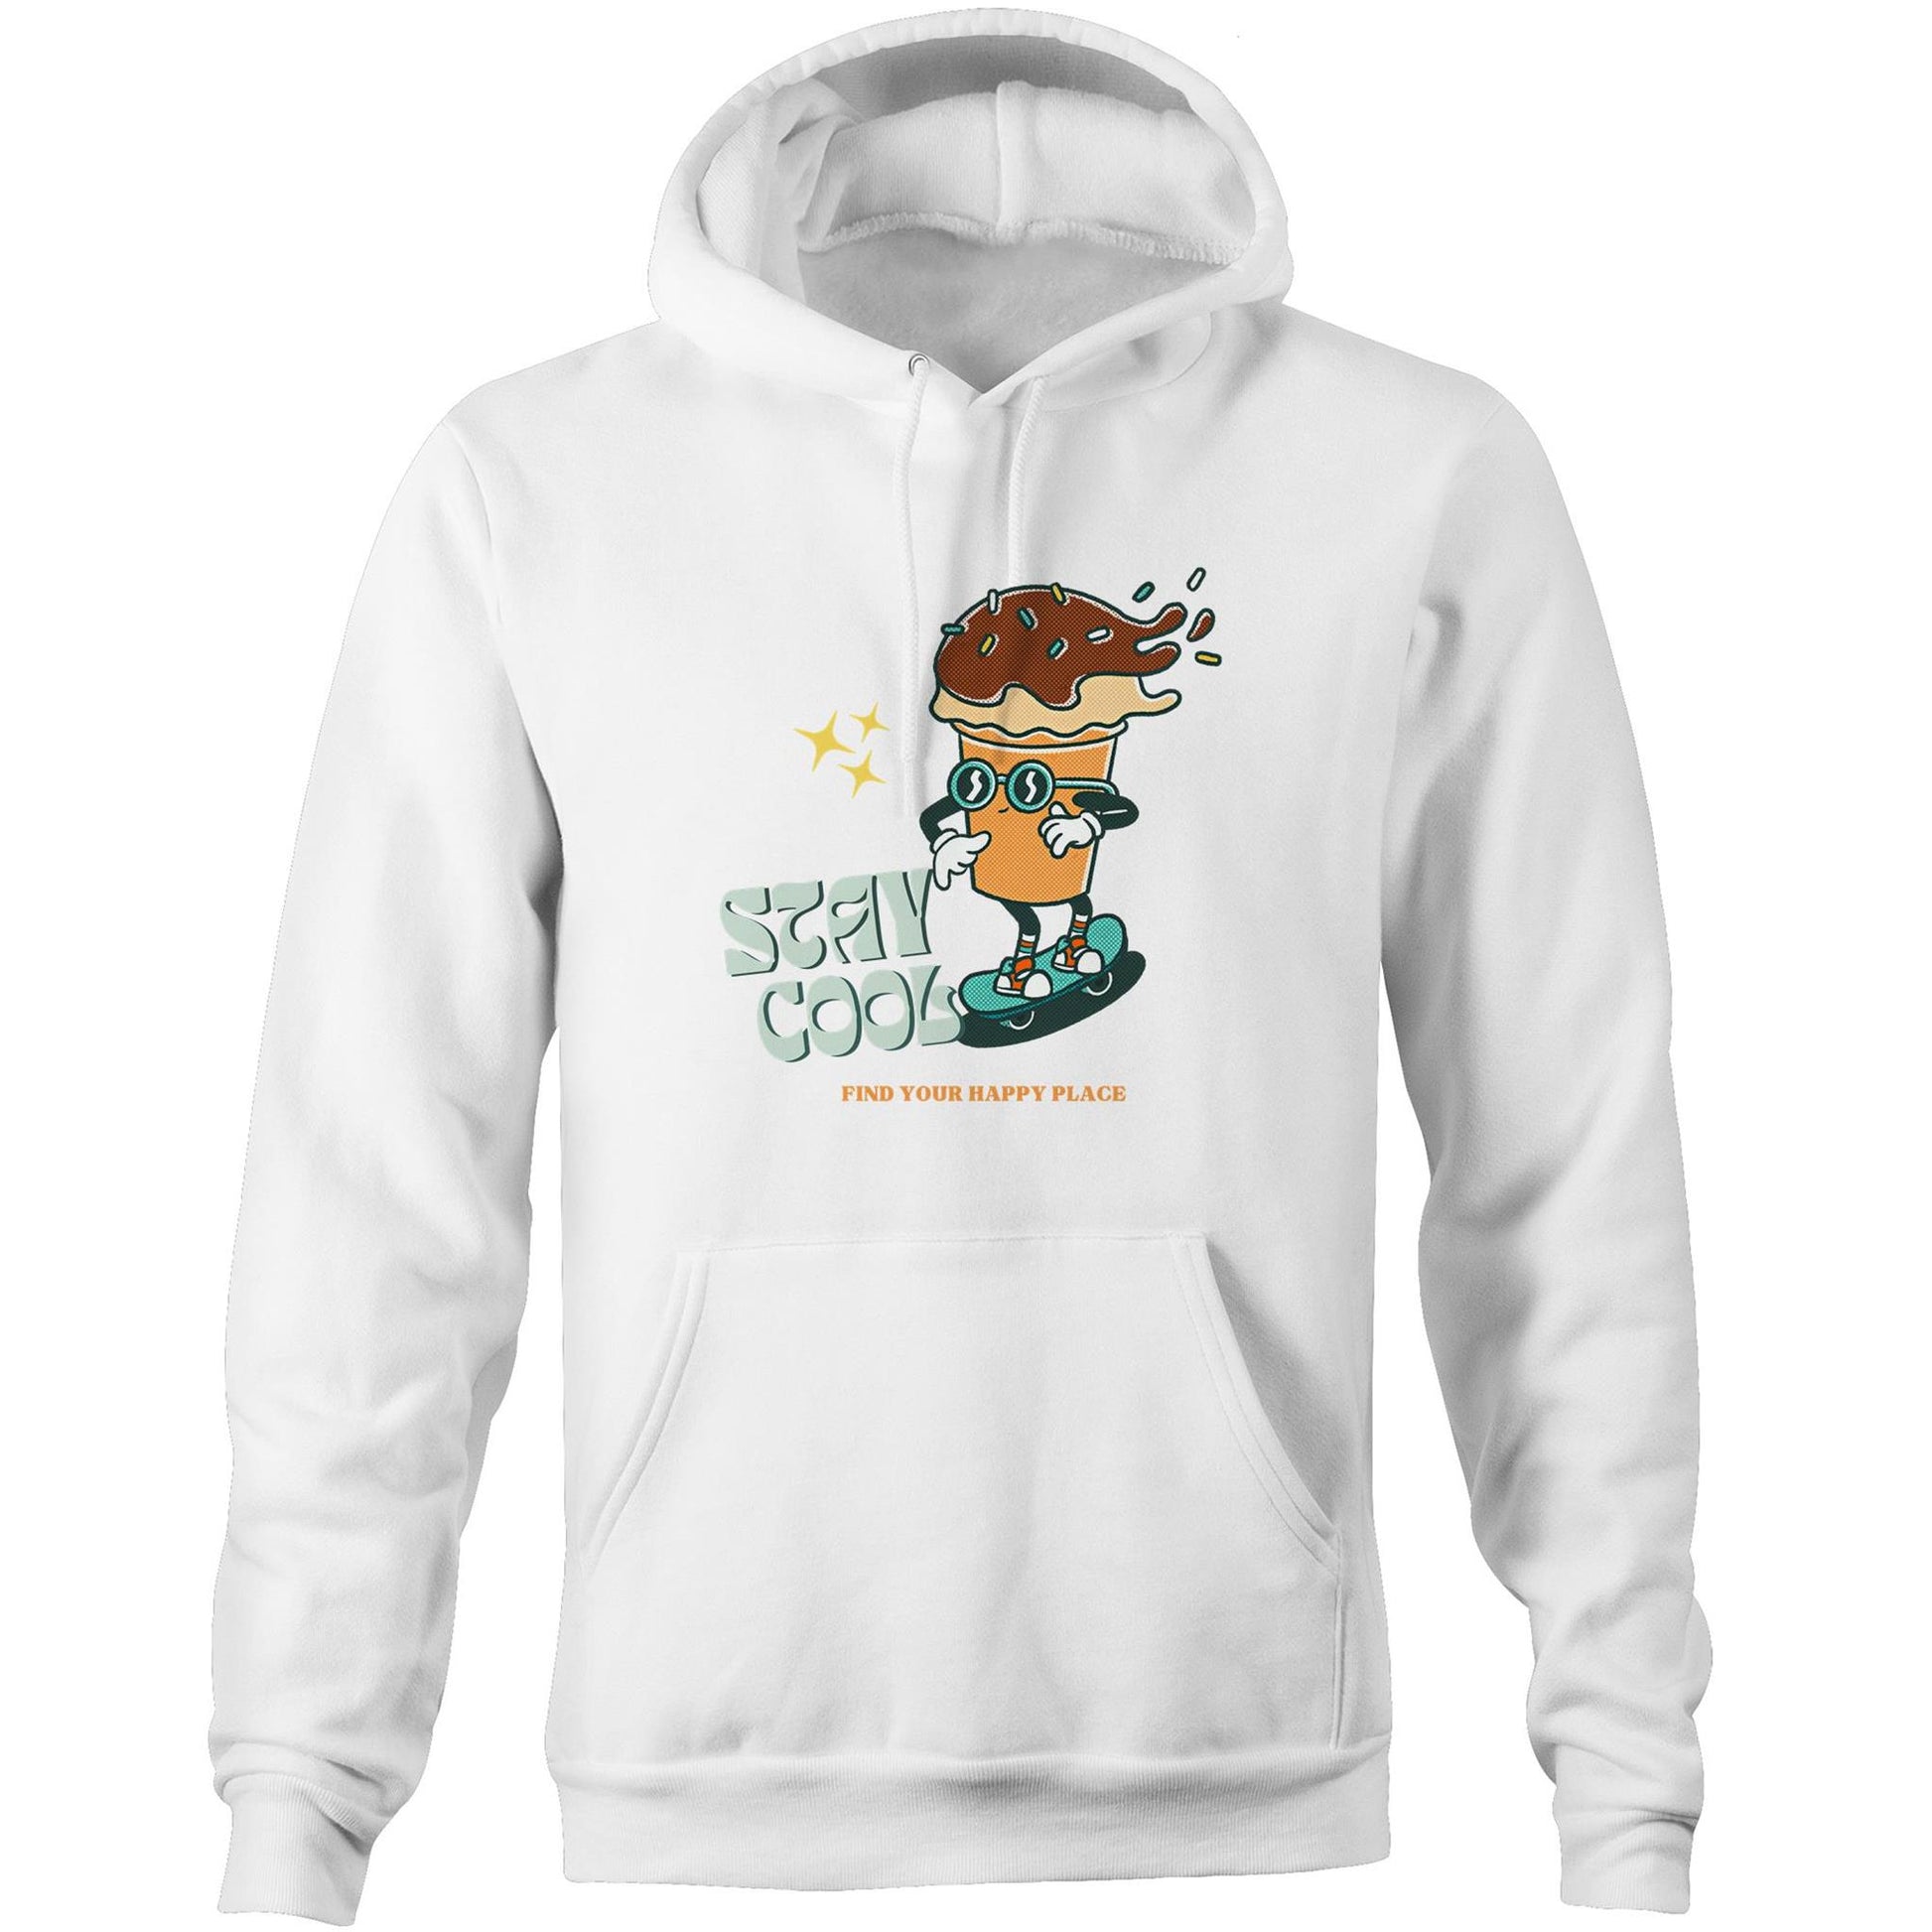 Stay Cool, Find Your Happy Place - Pocket Hoodie Sweatshirt White Hoodie Retro Summer